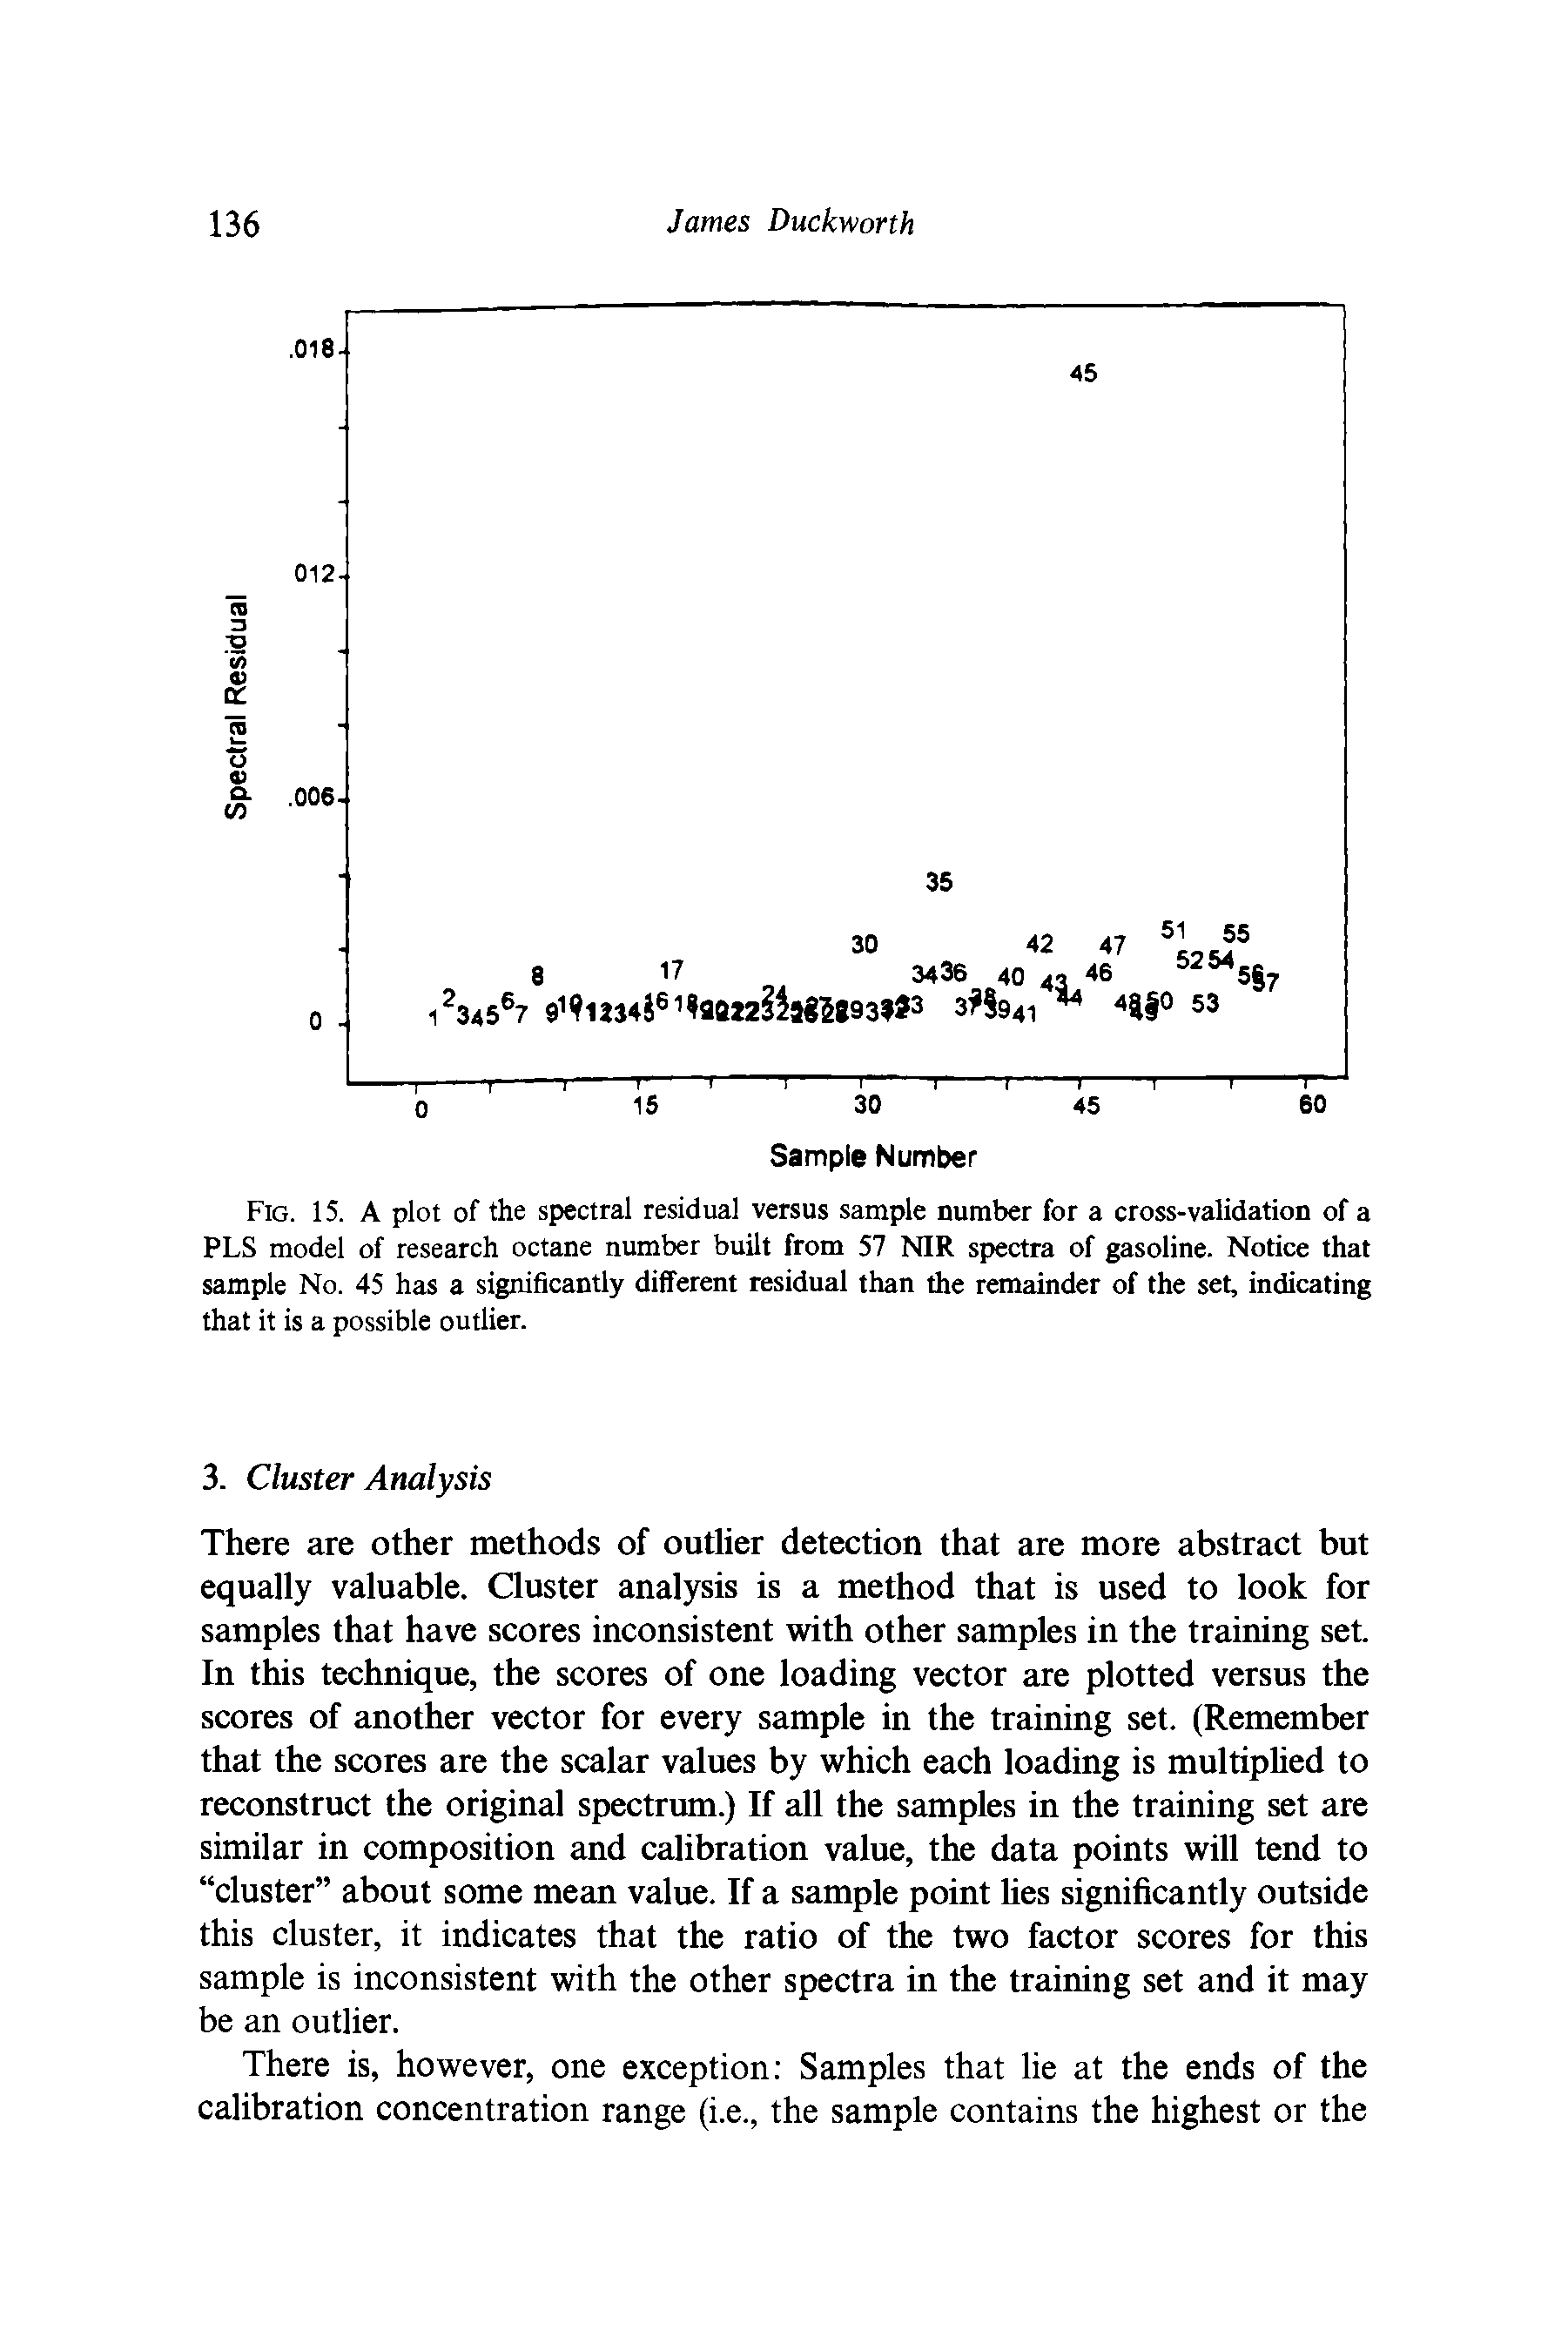 Fig. 15. A plot of the spectral residual versus sample number for a cross-validation of a PLS model of research octane number built from 57 NIR spectra of gasoline. Notice that sample No. 45 has a significantly different residual than the remainder of the set, indicating that it is a possible outlier.